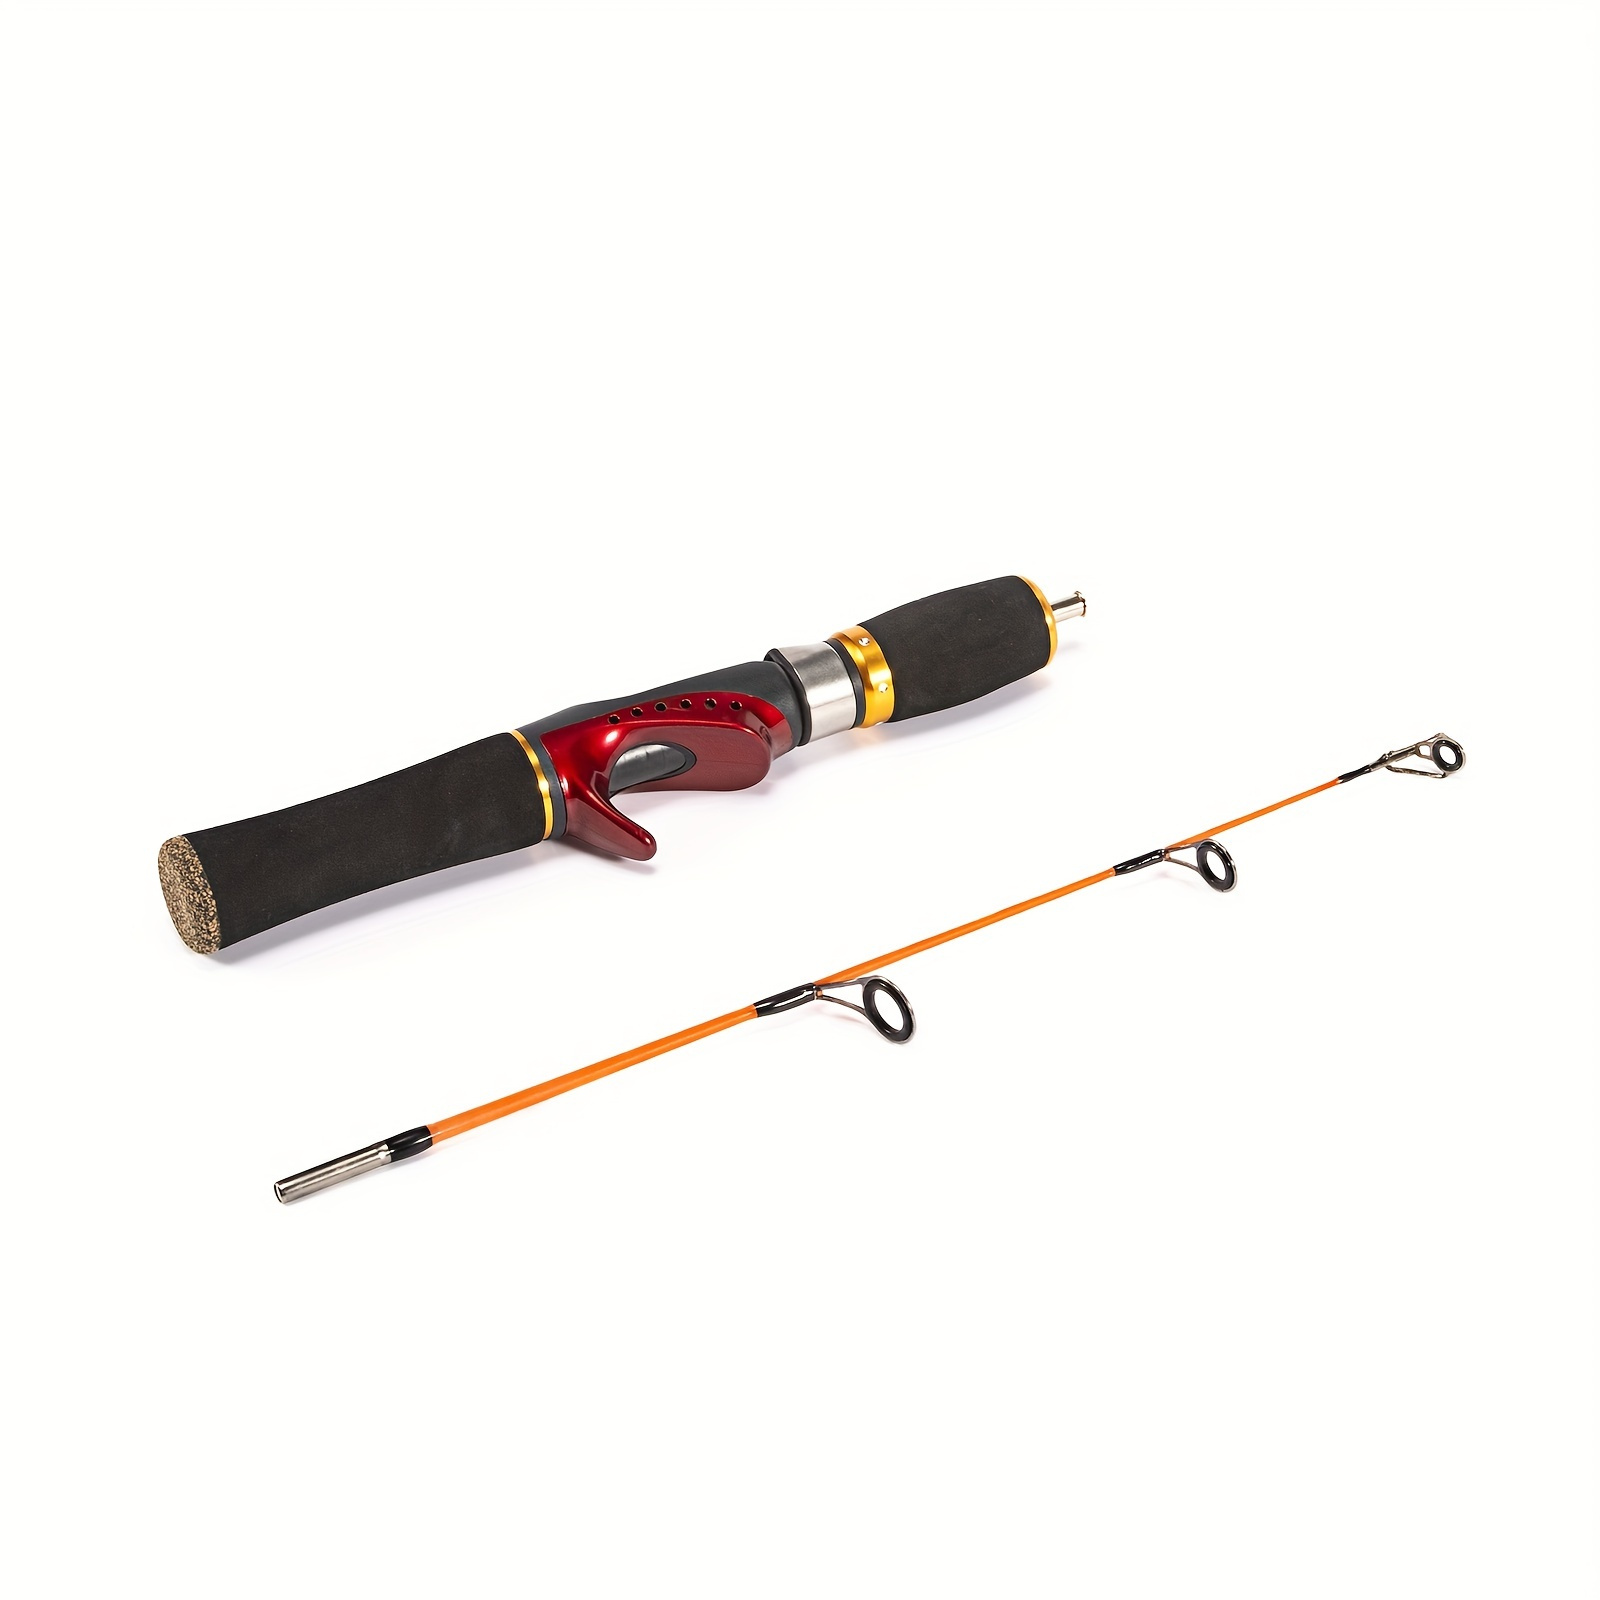 1pc 63cm/24.8in Solid Wood Ice Fishing Rod, Comfortable Wooden